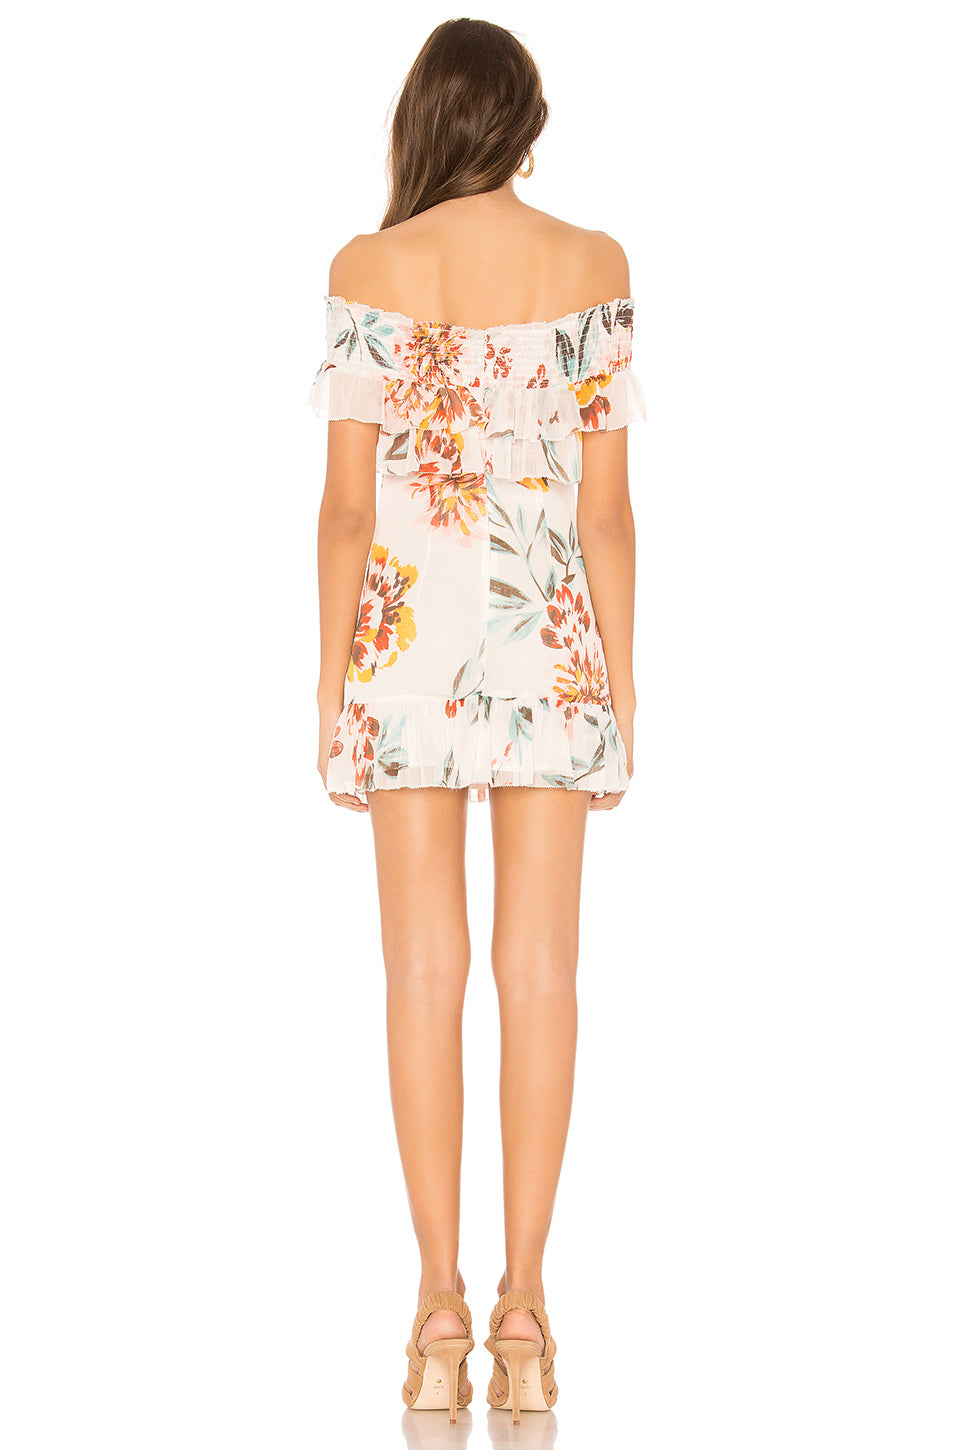 Lanzo Dress in DAHLIA FLORAL